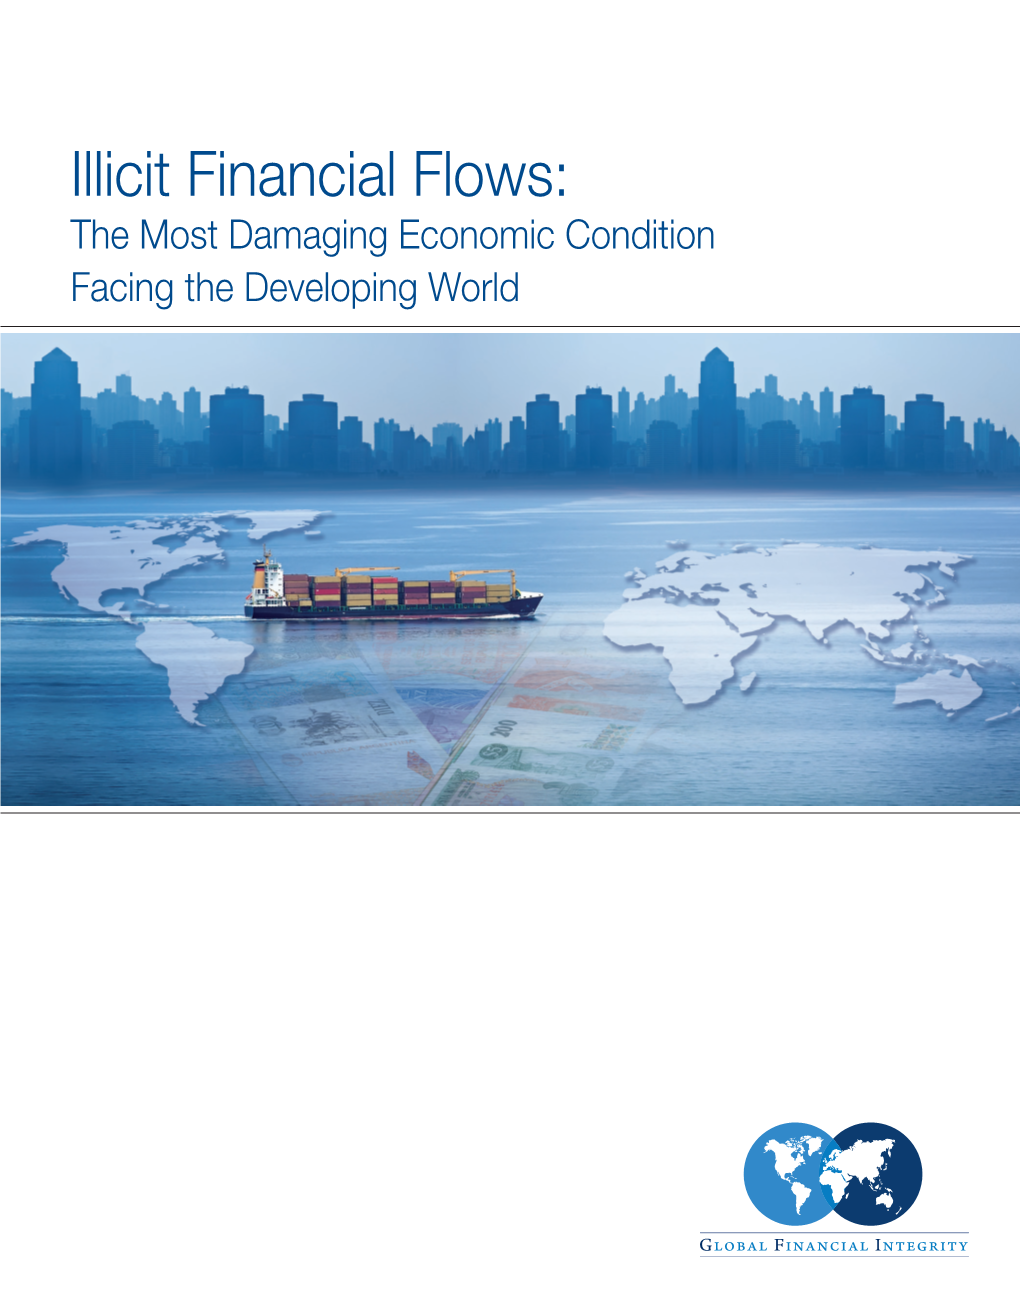 Illicit Financial Flows: the Most Damaging Economic Condition Facing the Developing World